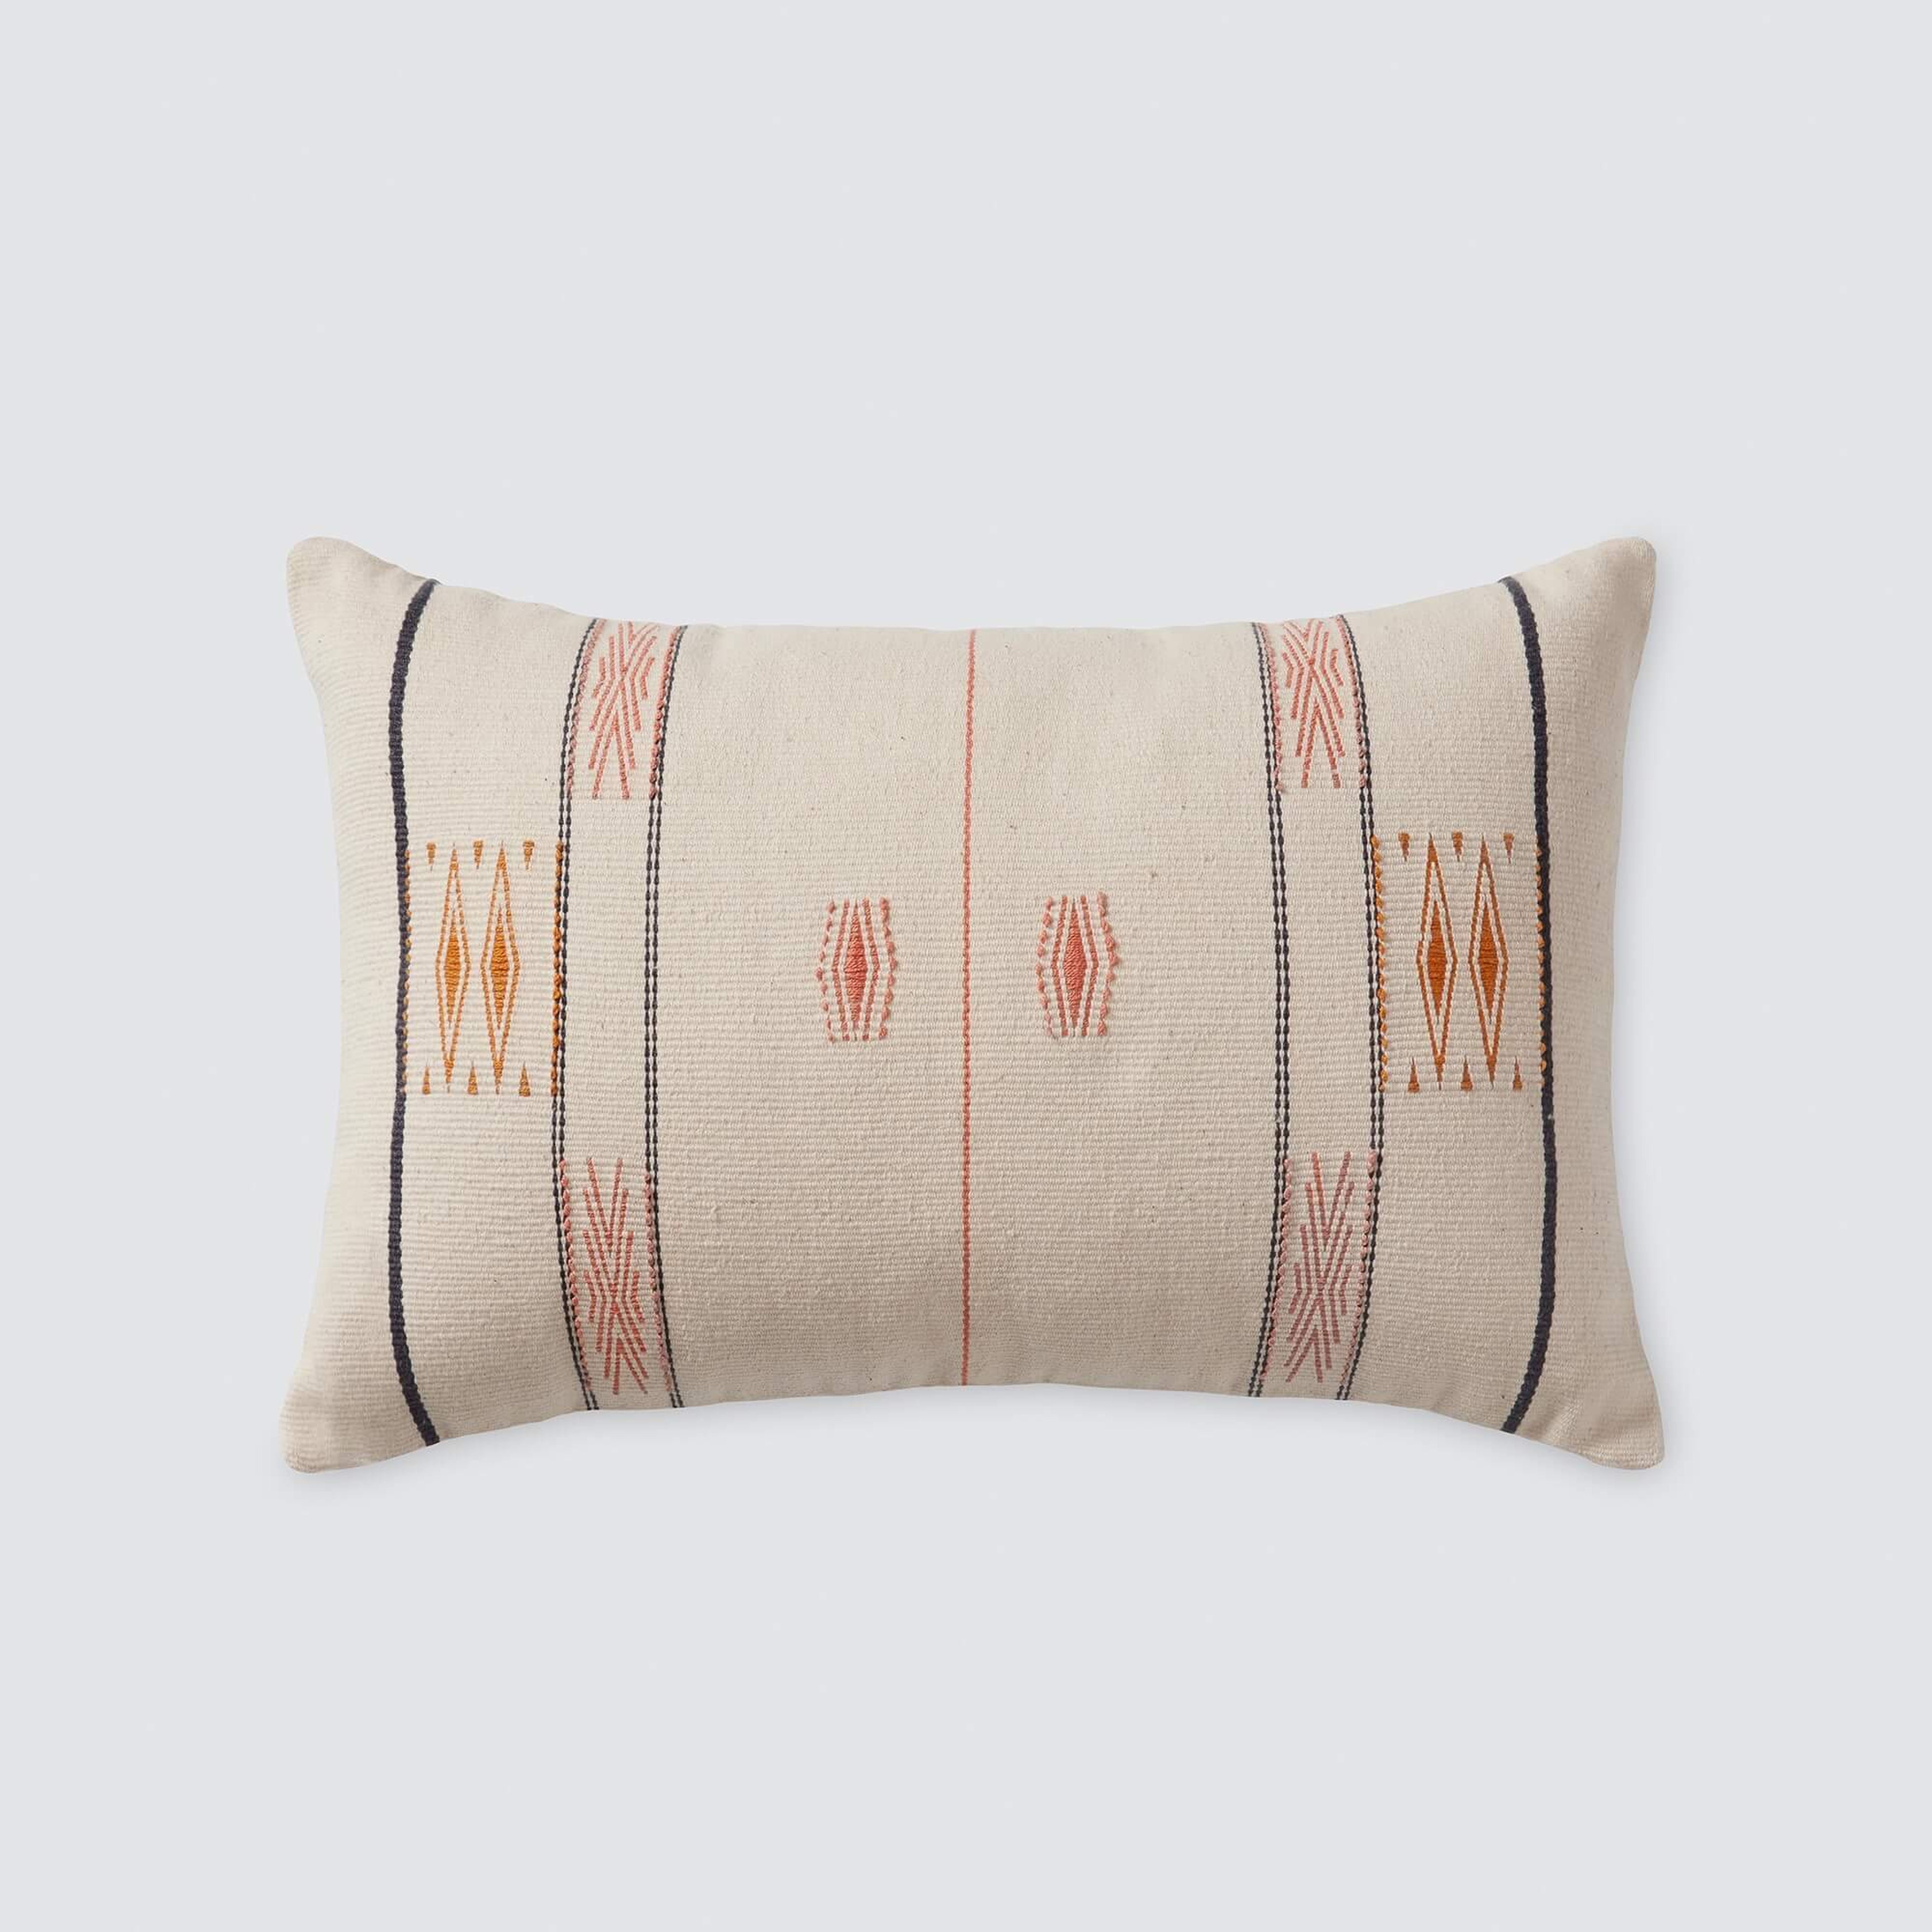 Sumi Lumbar Pillow By The Citizenry - The Citizenry